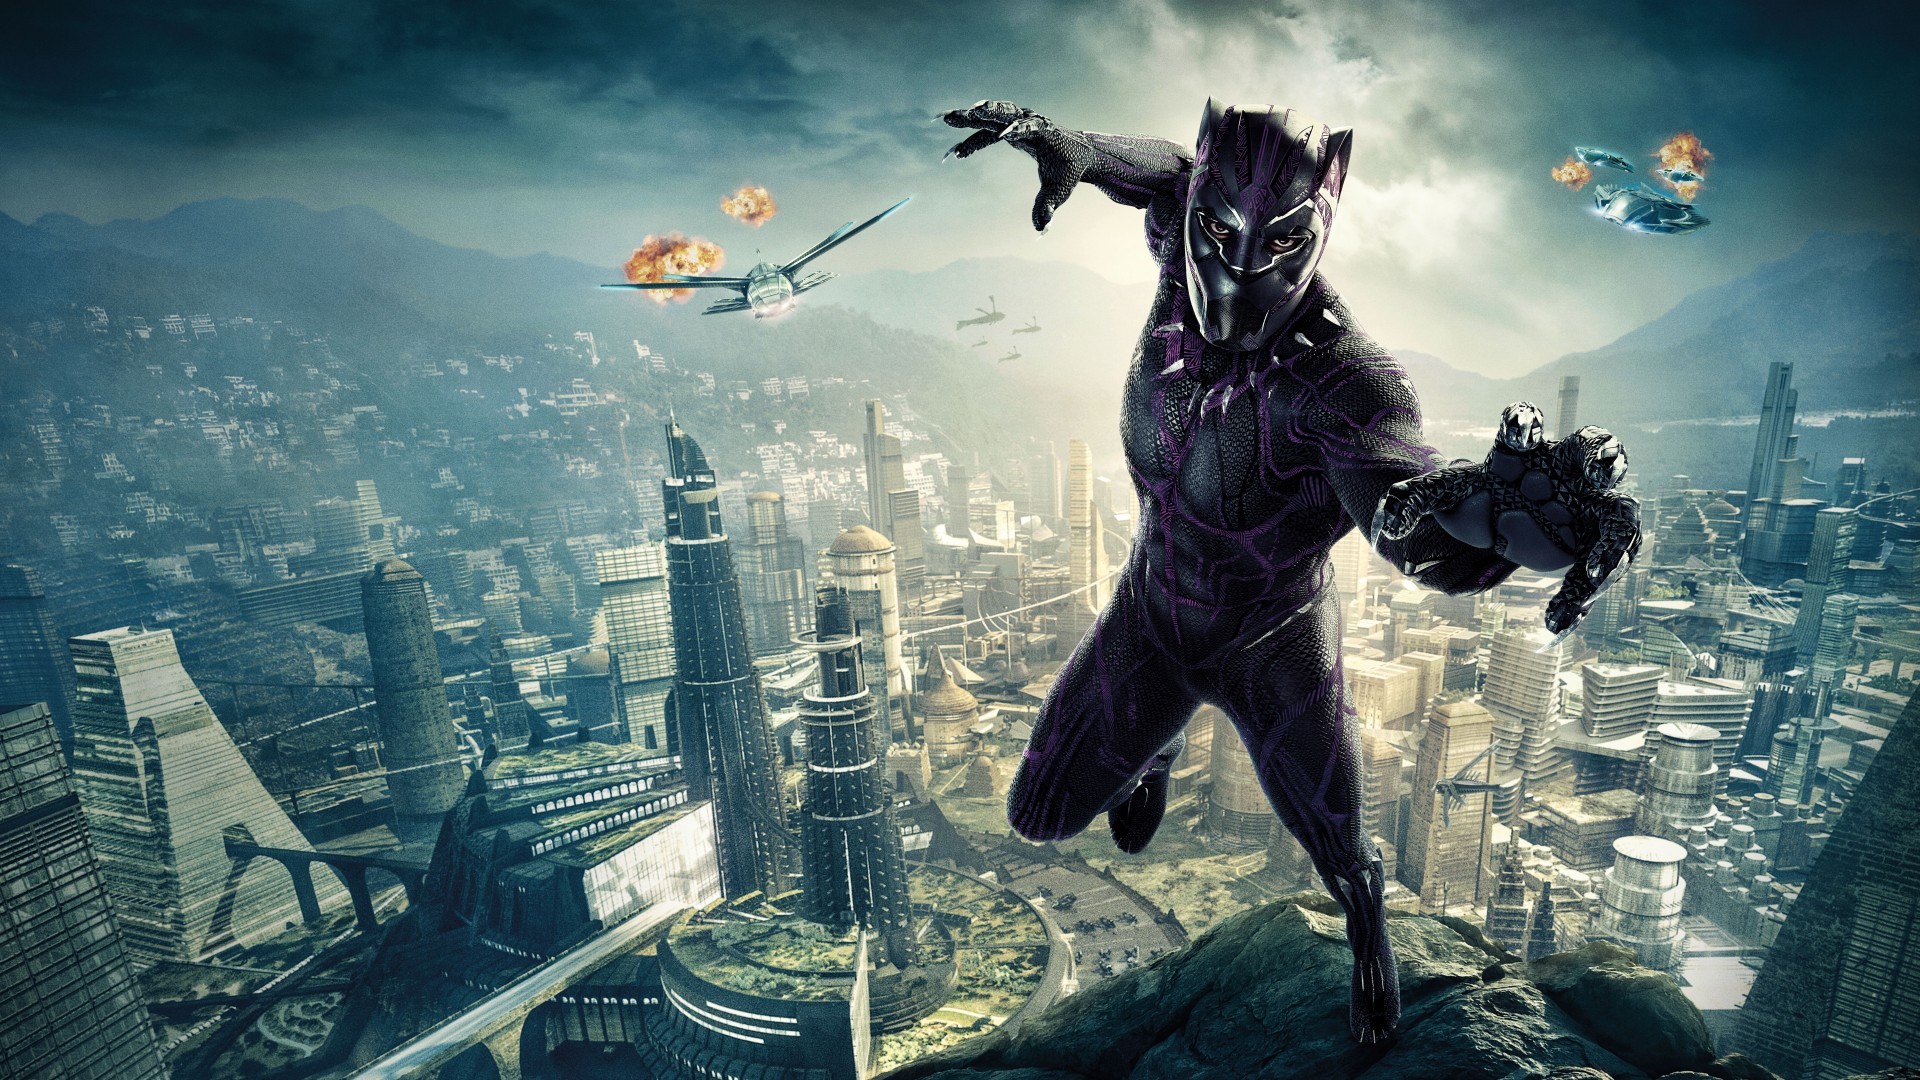 Black Panther Superhero Wallpaper with high-resolution 1920x1080 pixel. You can use this poster wallpaper for your Desktop Computers, Mac Screensavers, Windows Backgrounds, iPhone Wallpapers, Tablet or Android Lock screen and another Mobile device